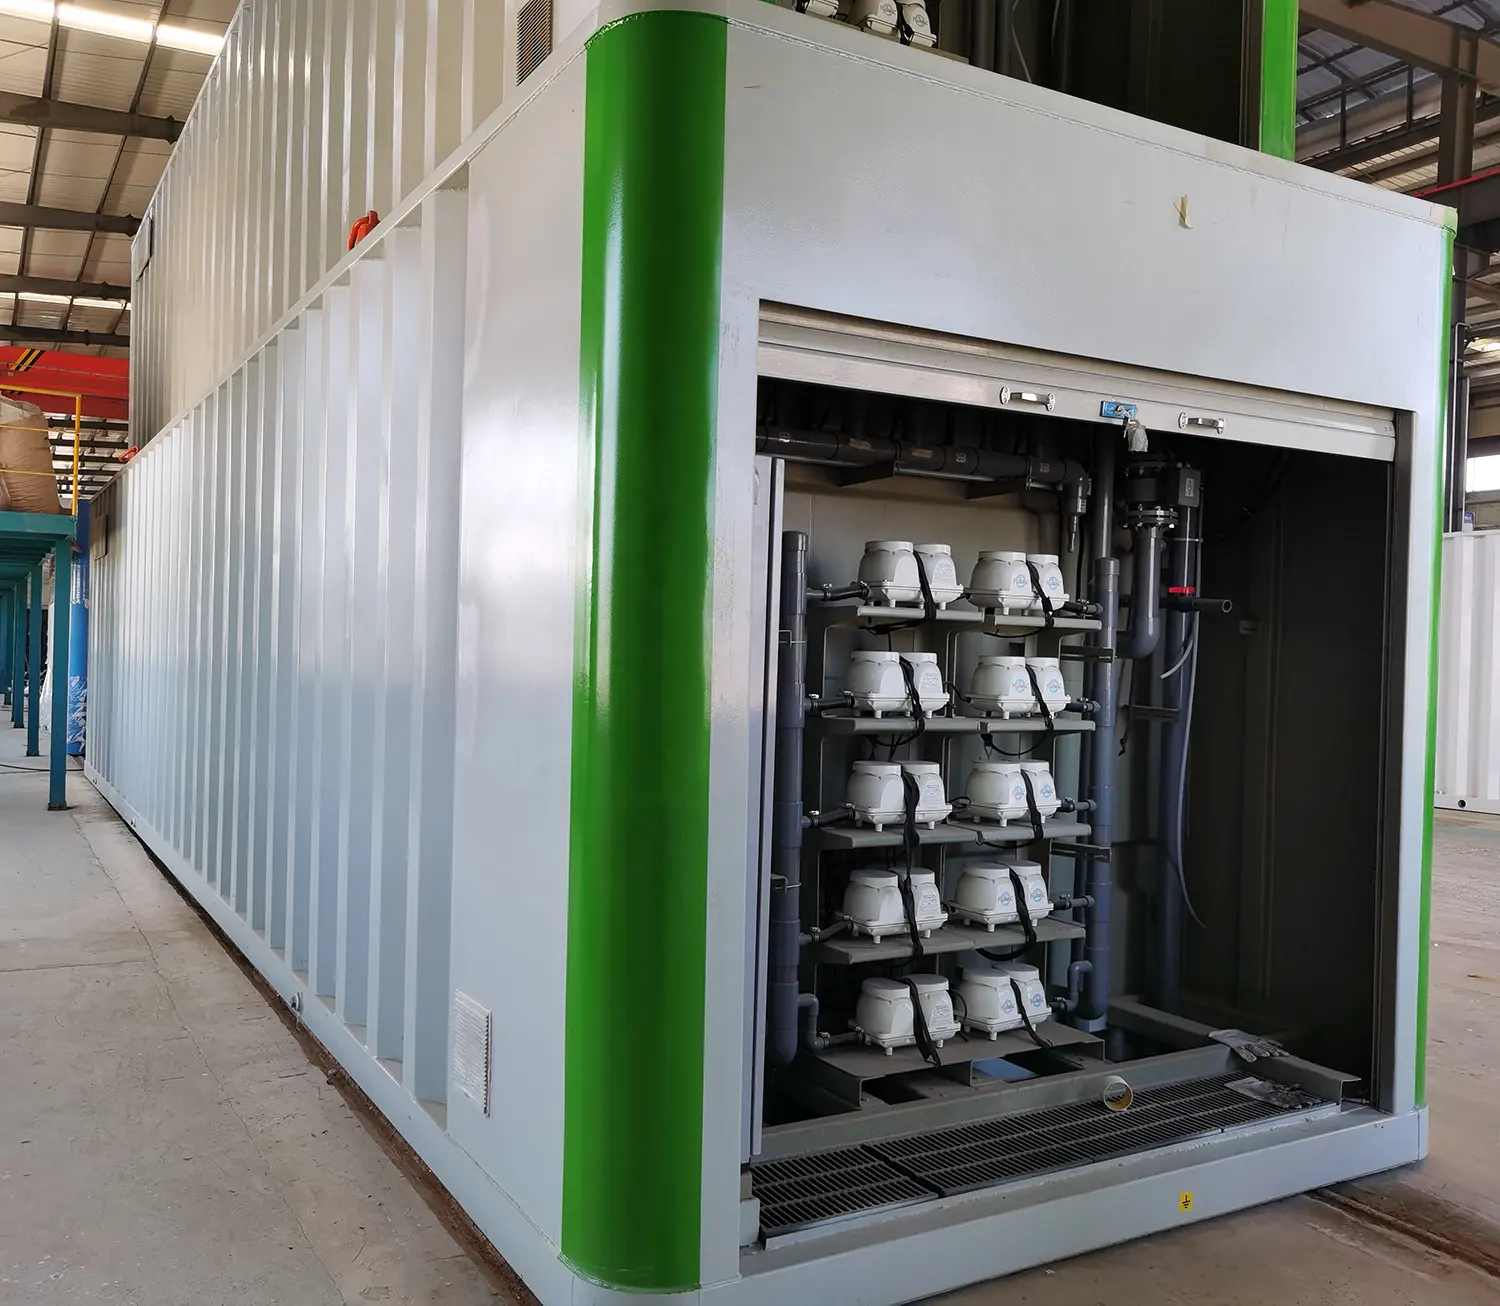 MBBR containerized poultry slaughtering and processing package sewage wastewater treatment plant system